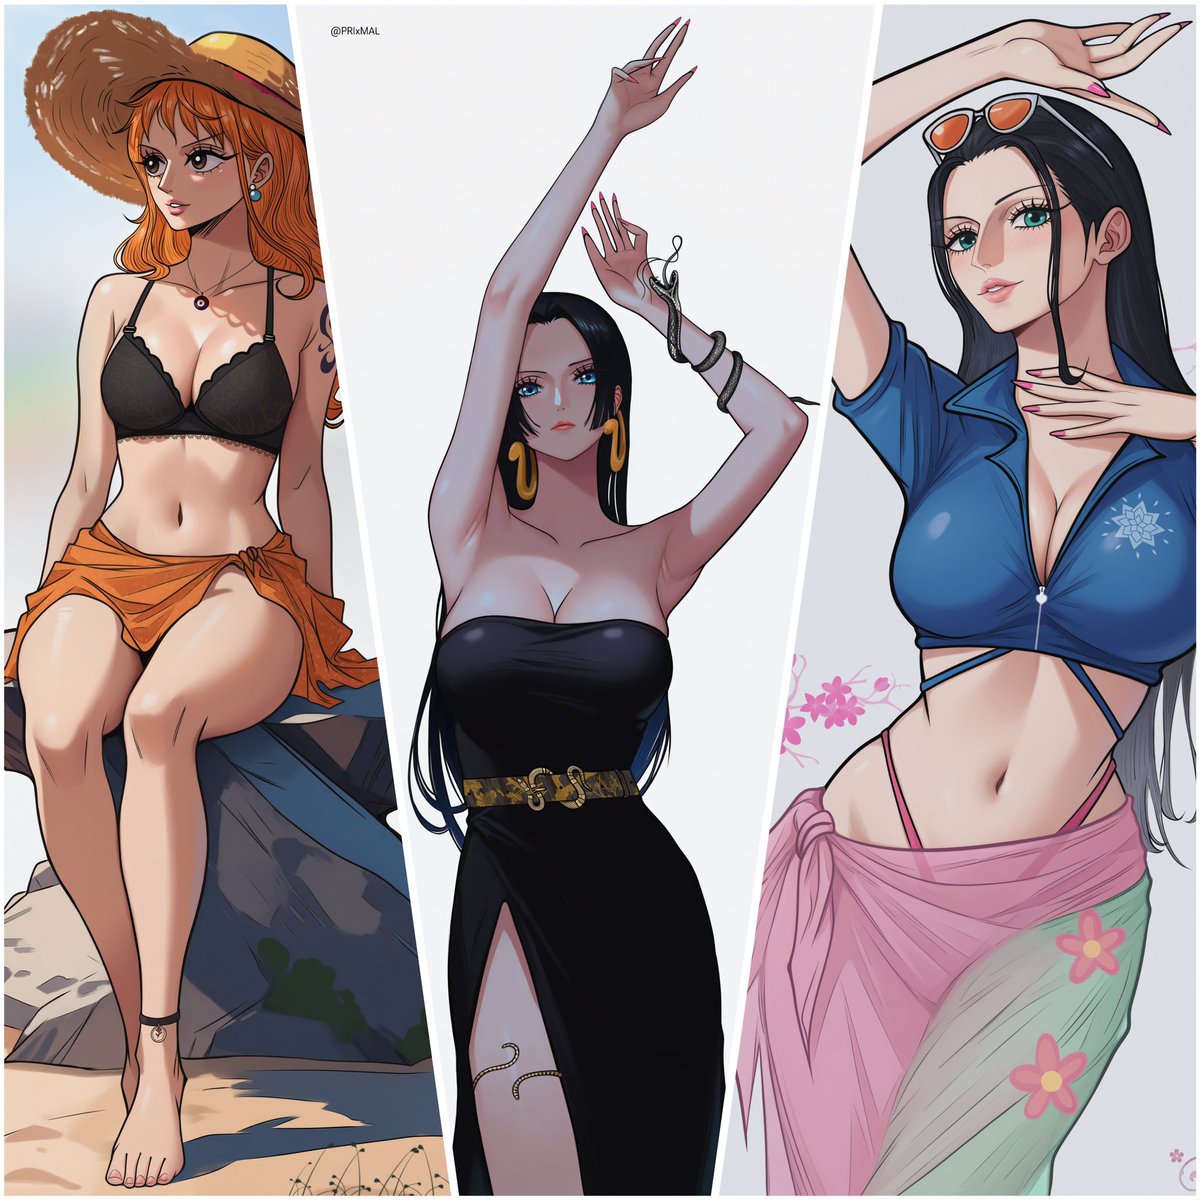 Nami x Hancock x Nico Robin - The Queen Trio 🌹💕

Which one is your favorite?

#ONEPIECE